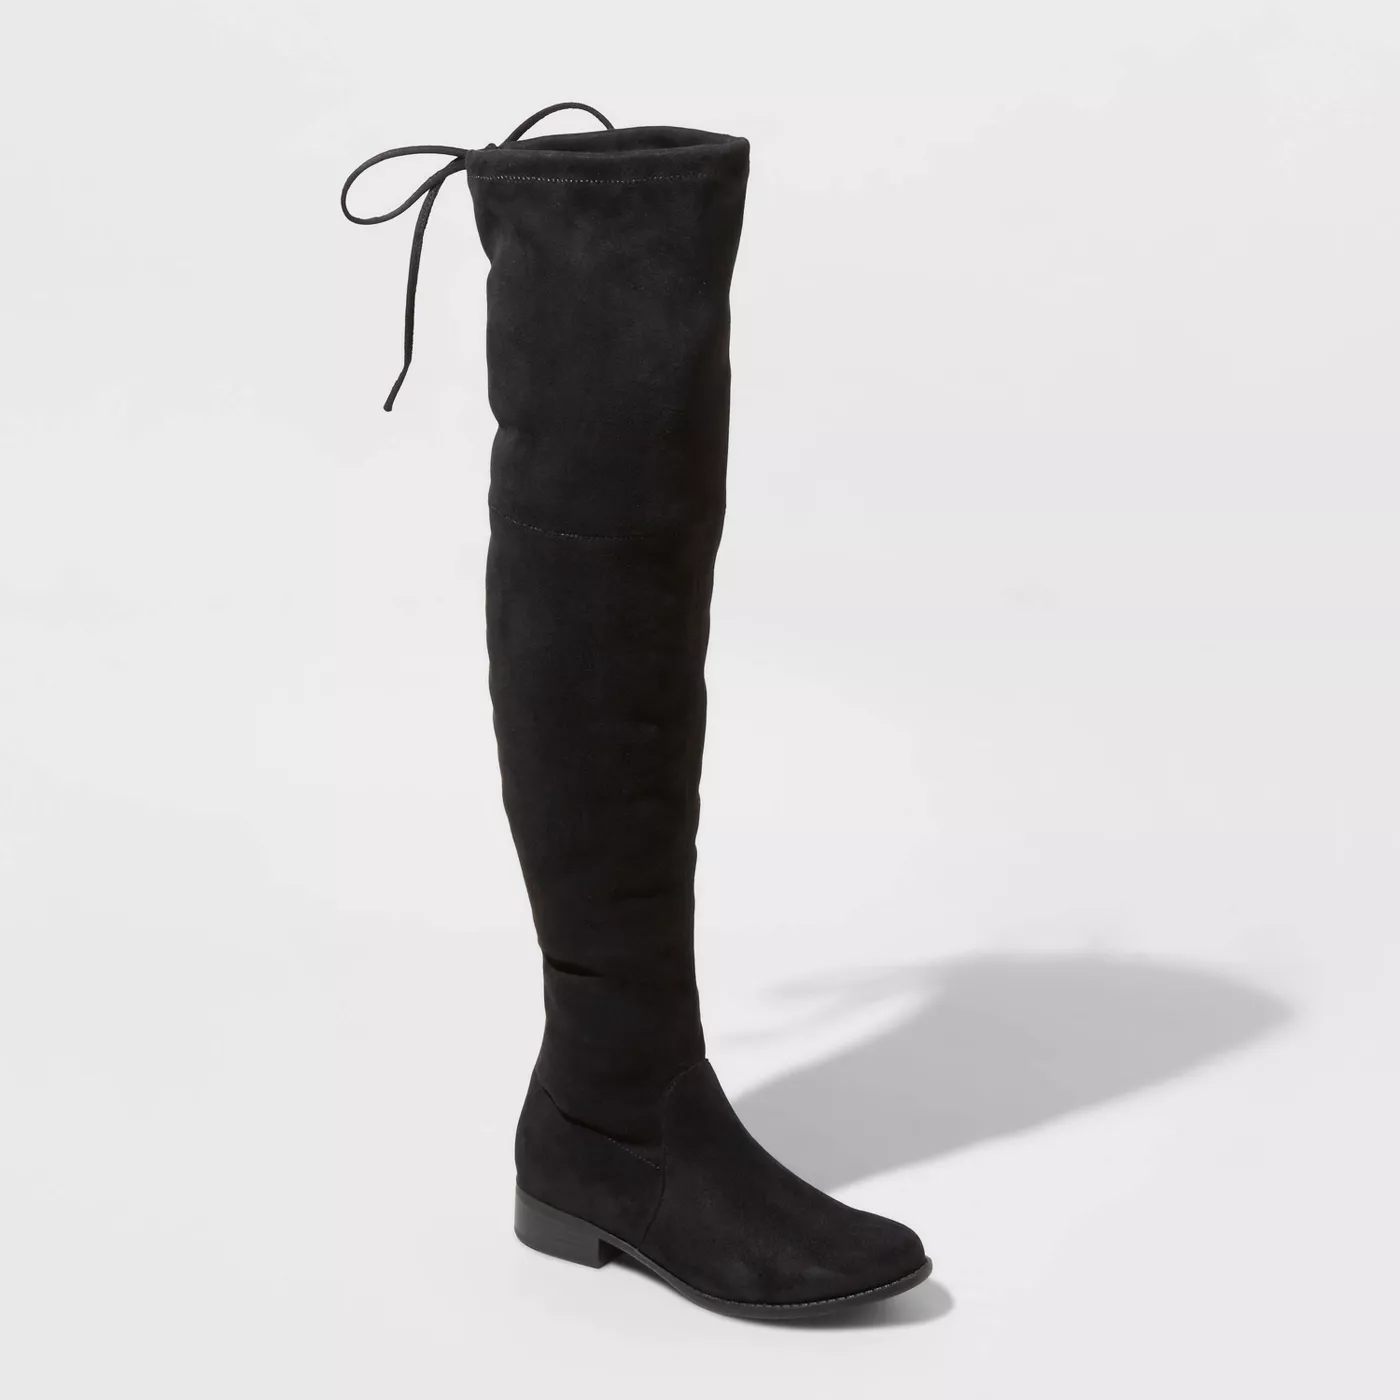 Women's Sidney Microsuede Over the Knee Fashion Boots - A New Day™ - image 1 of 8